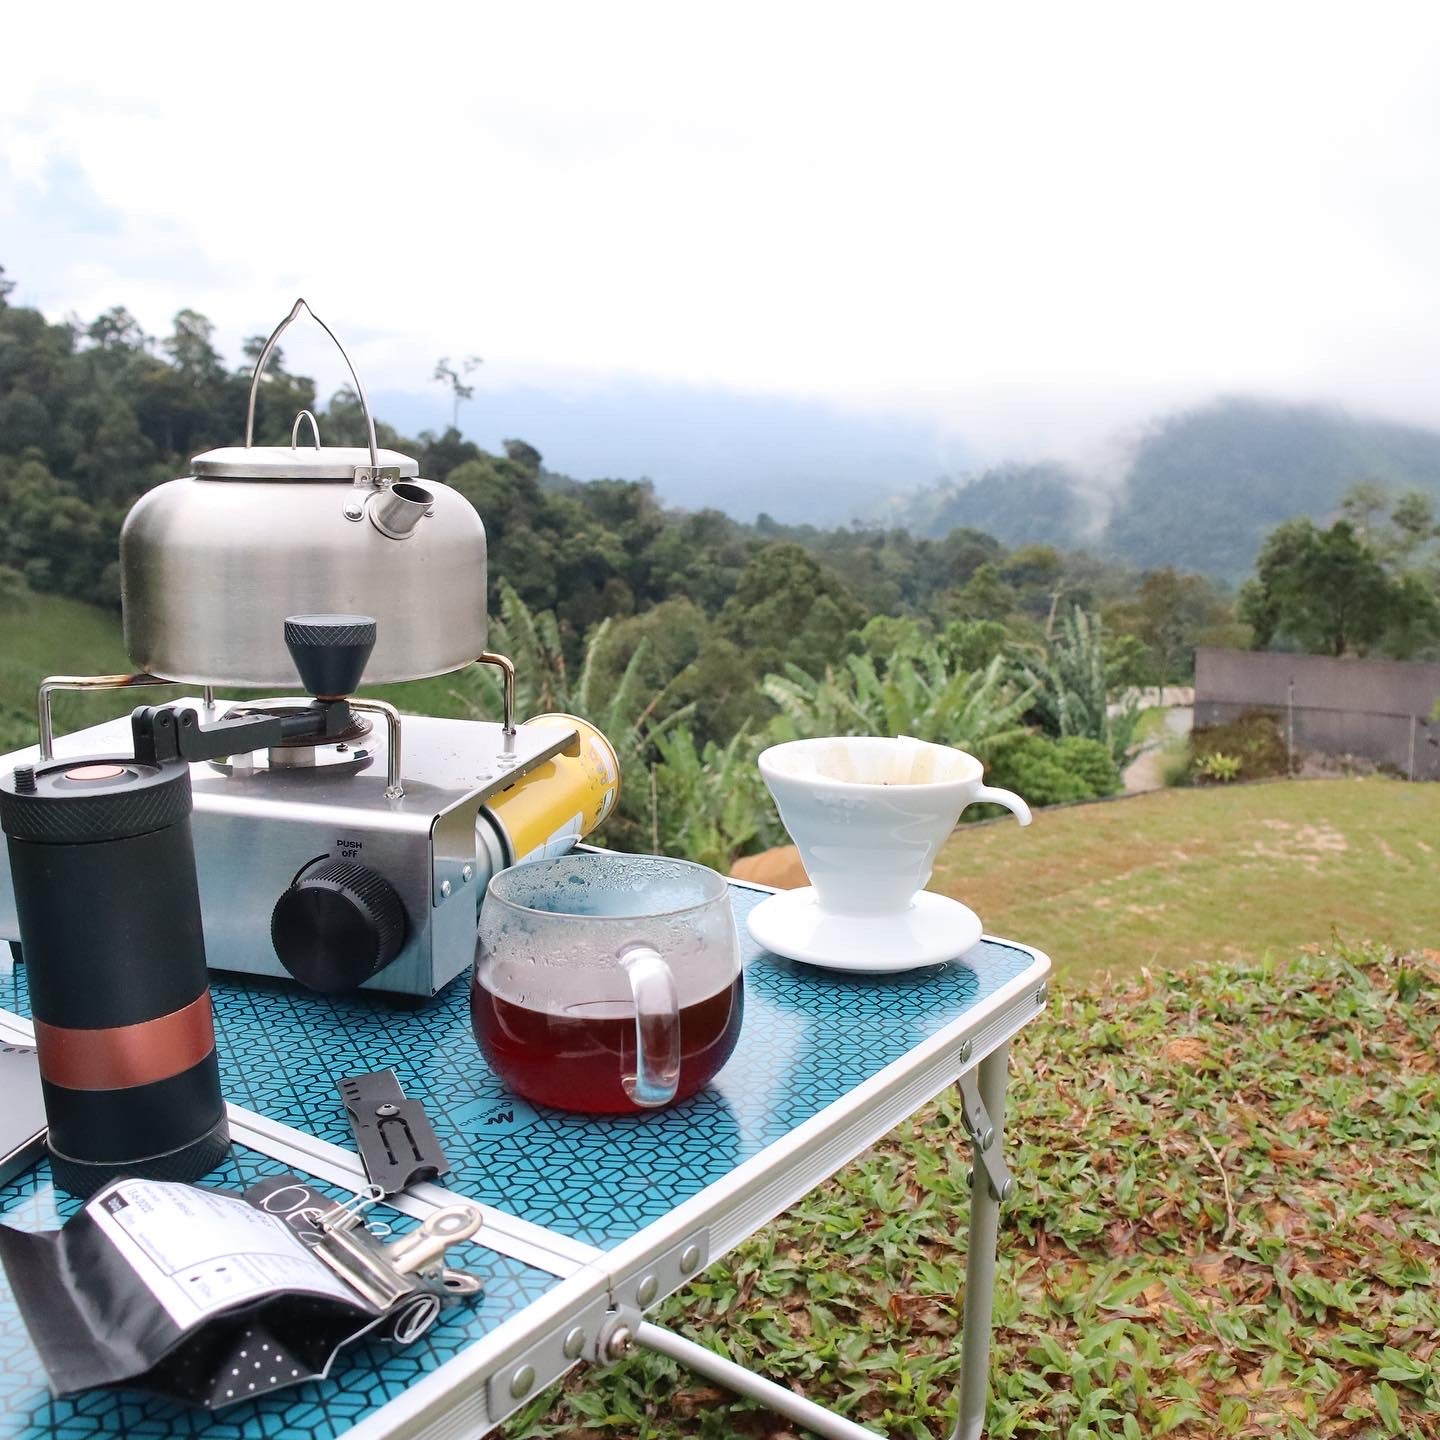 How To Brew The Best Coffee Without A Weighing Scale, Thermometer, Brewing Kettle & Grinder